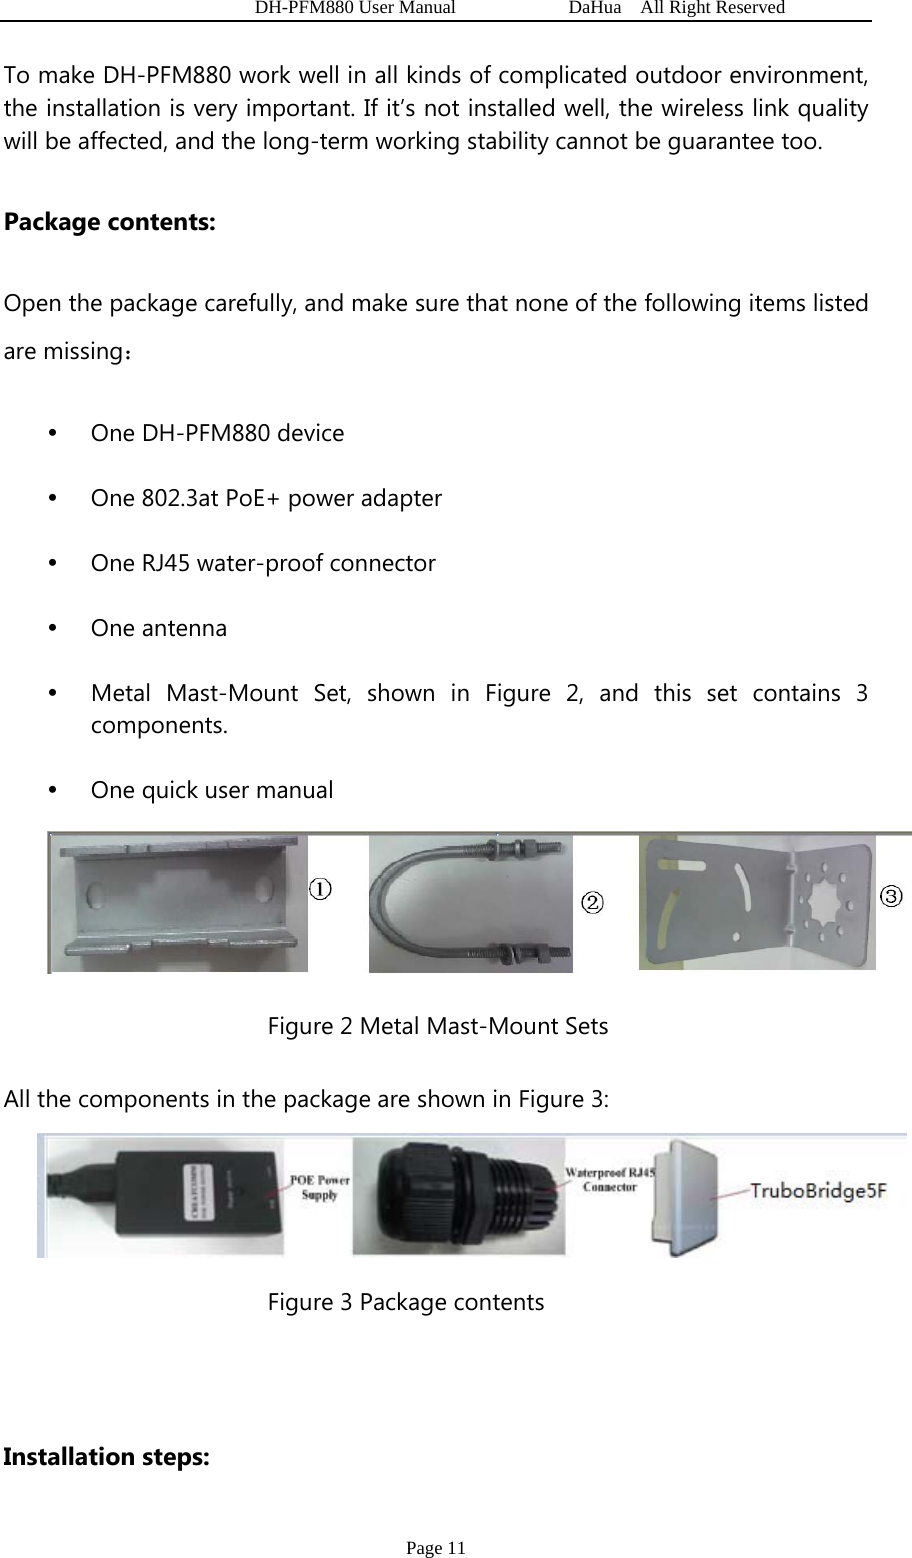   DH-PFM880 User Manual            DaHua  All Right Reserved Page 11 To make DH-PFM880 work well in all kinds of complicated outdoor environment, the installation is very important. If it’s not installed well, the wireless link quality will be affected, and the long-term working stability cannot be guarantee too. Package contents: Open the package carefully, and make sure that none of the following items listed are missing： y One DH-PFM880 device y One 802.3at PoE+ power adapter y One RJ45 water-proof connector y One antenna y Metal Mast-Mount Set, shown in Figure 2, and this set contains 3 components. y One quick user manual  Figure 2 Metal Mast-Mount Sets All the components in the package are shown in Figure 3:  Figure 3 Package contents  Installation steps: 